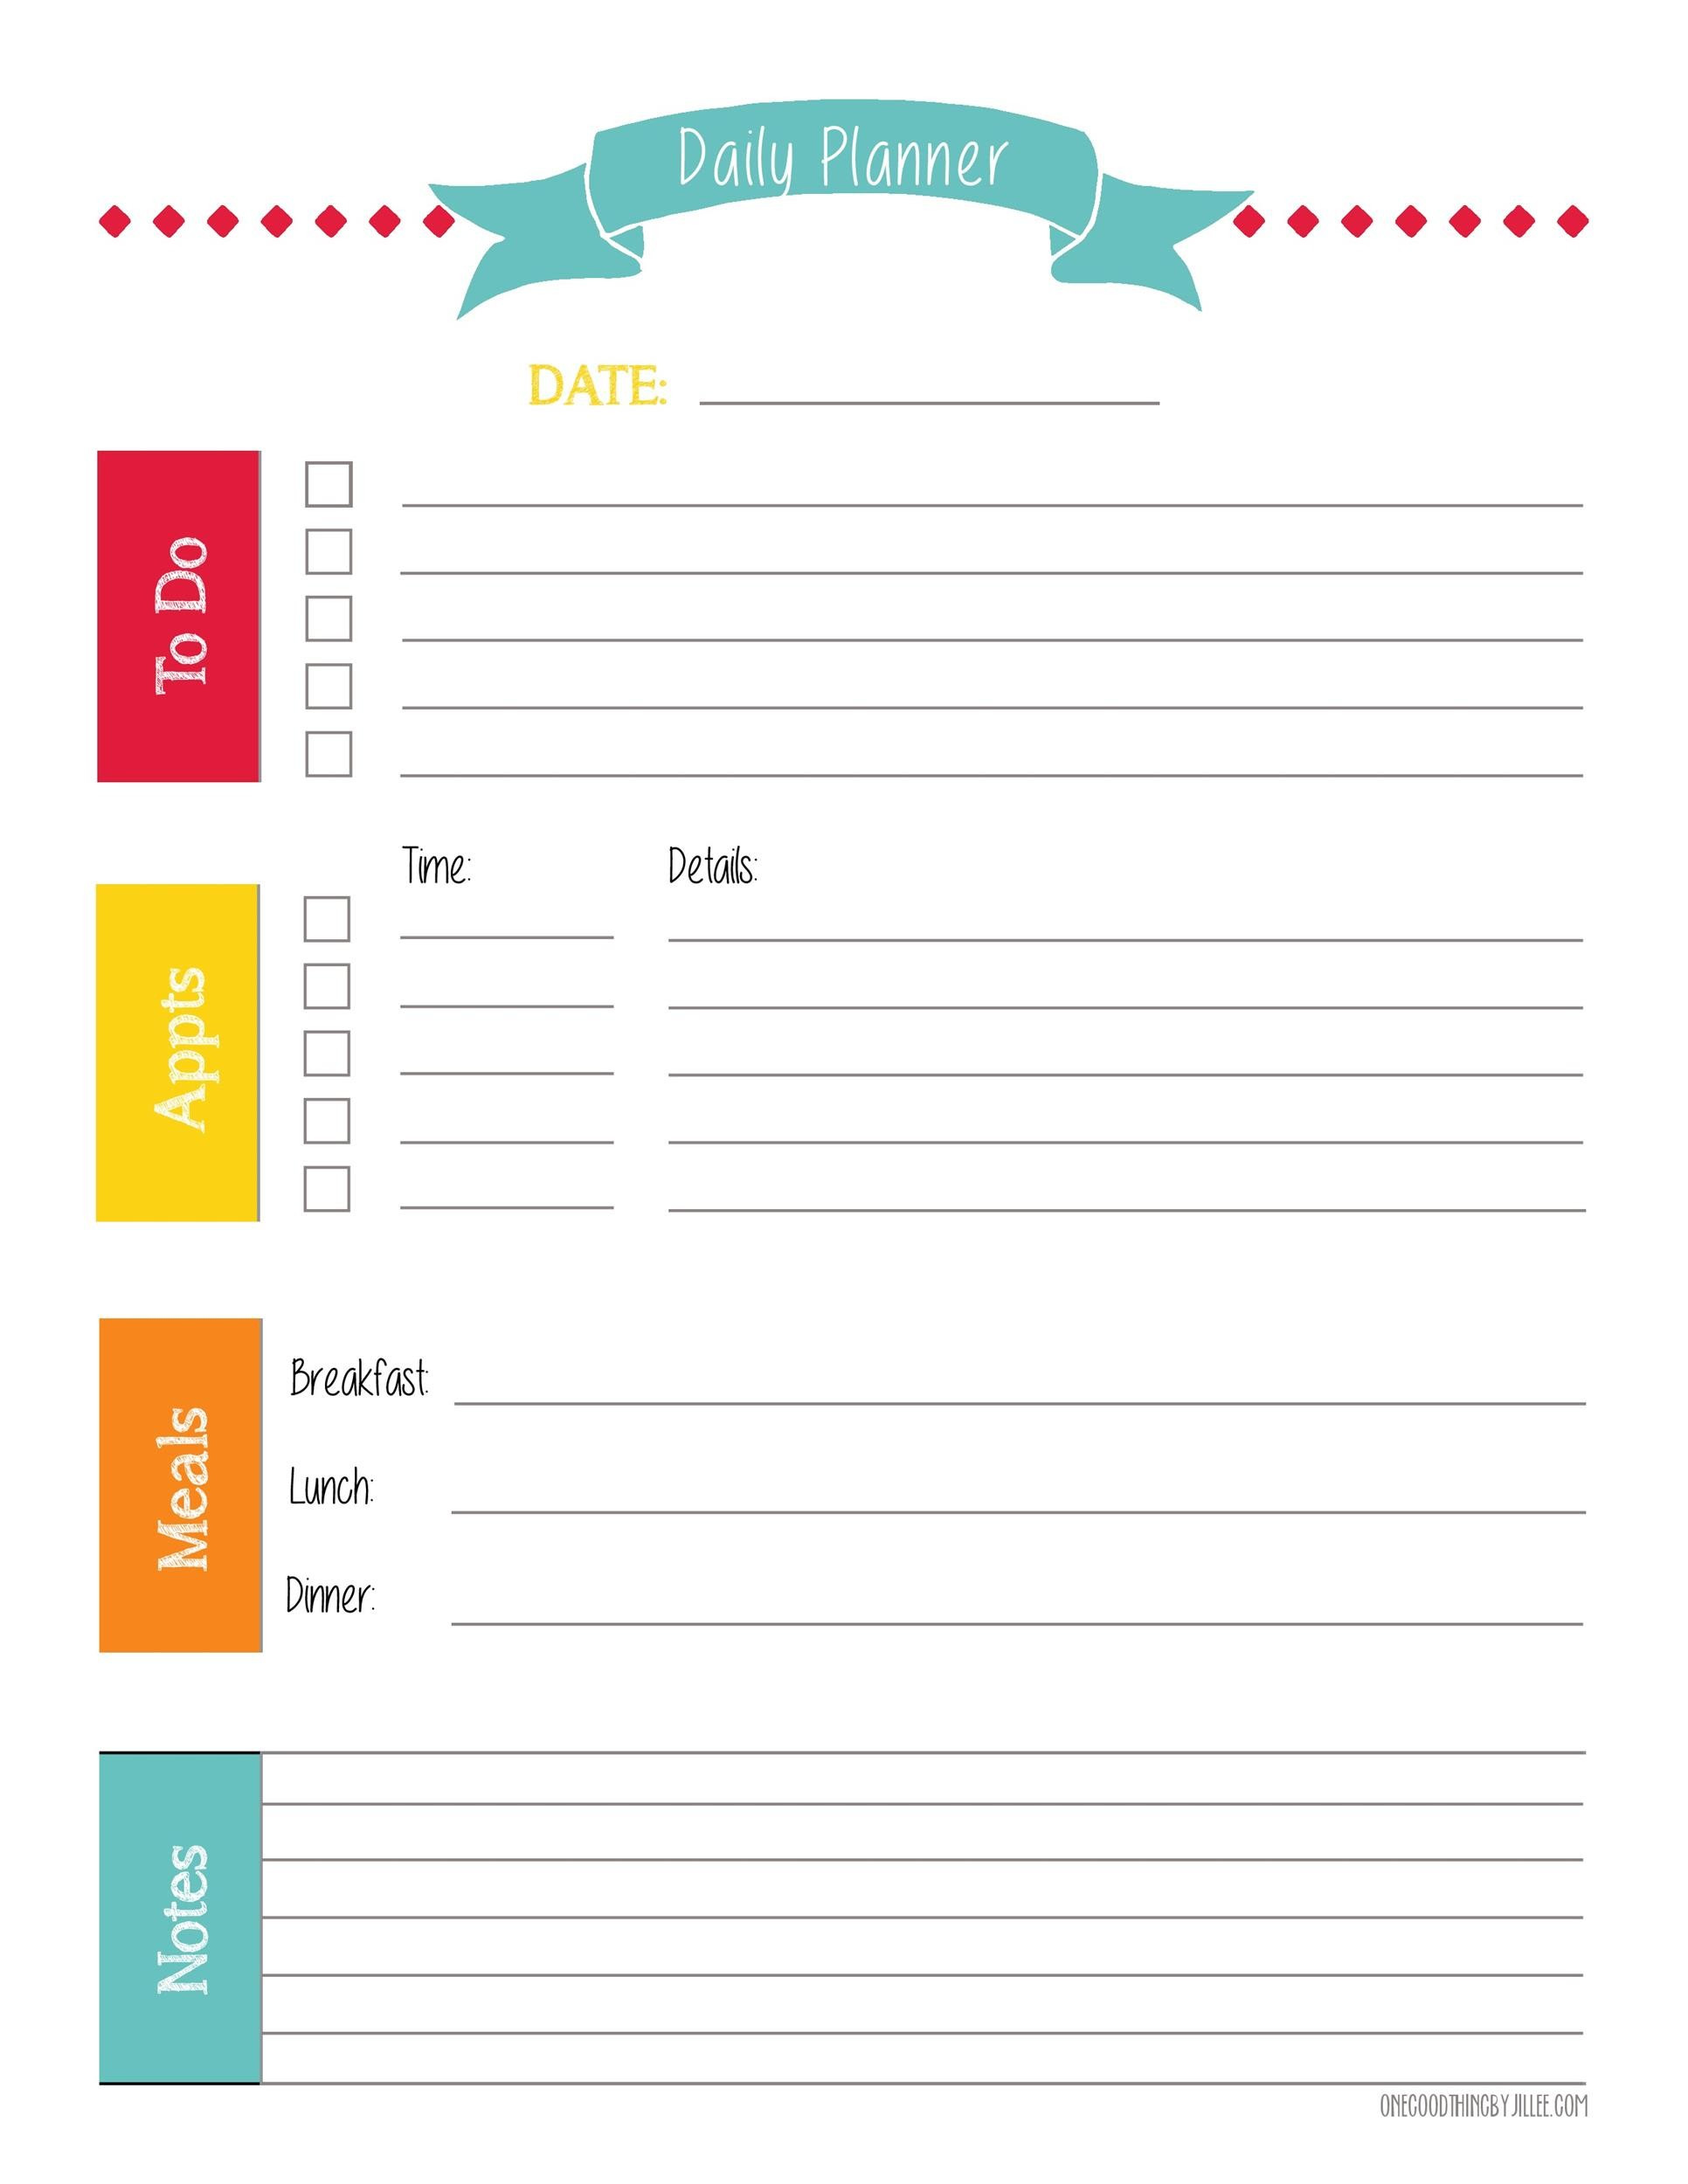 printable-daily-planner-template-for-excel